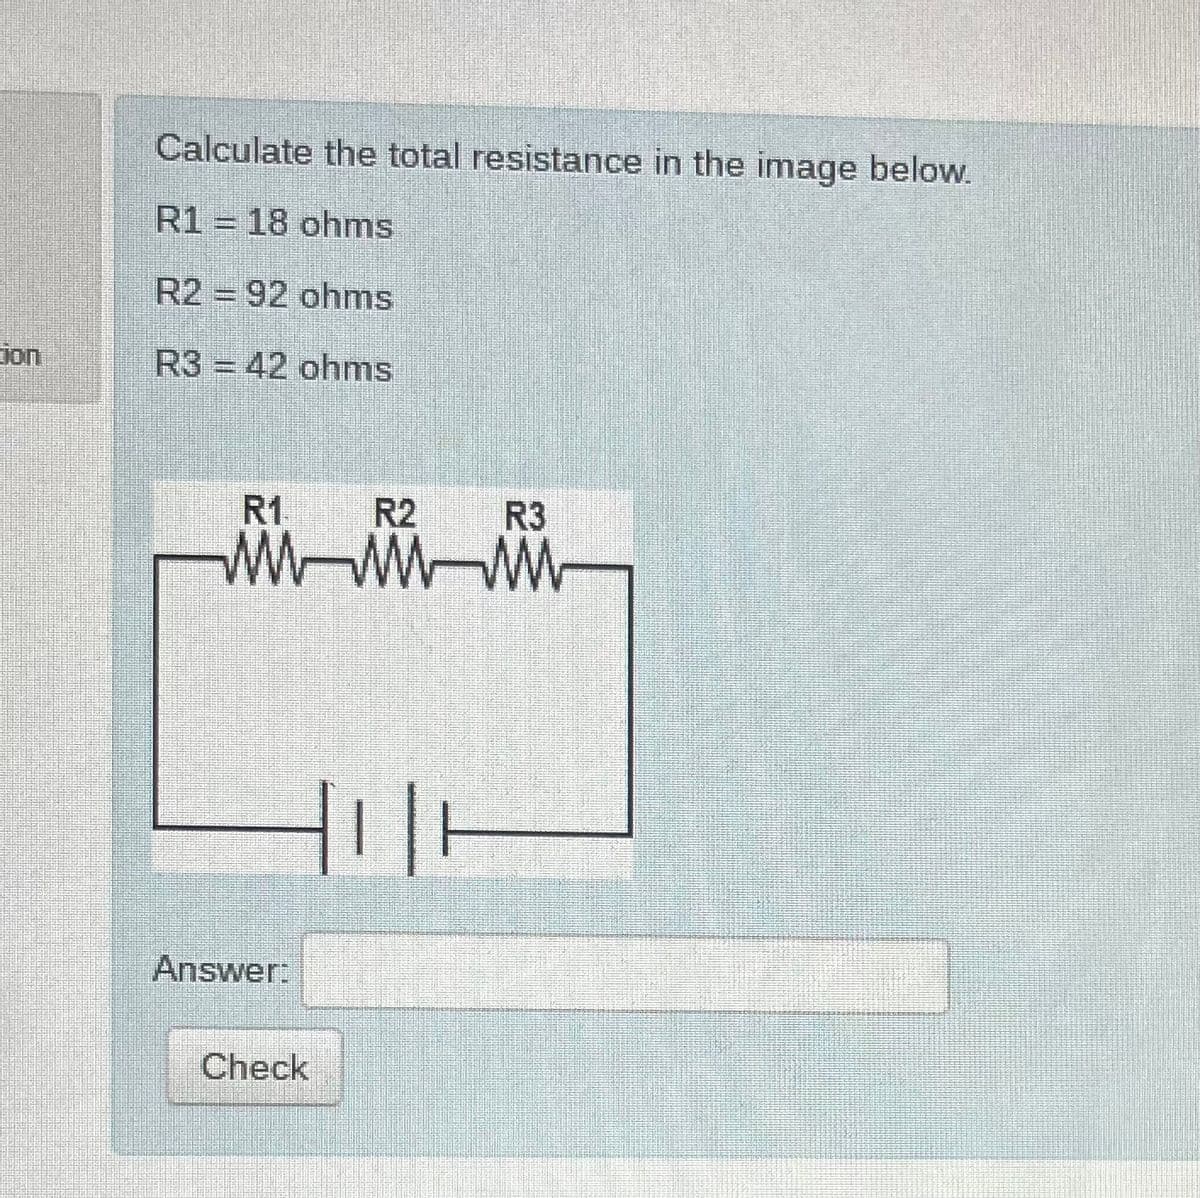 Calculate the total resistance in the image below.
R1 = 18 ohms
R2 = 92 ohms
ion
R3 = 42 ohms
R1
R2
R3
W -W
Answer:
Check
